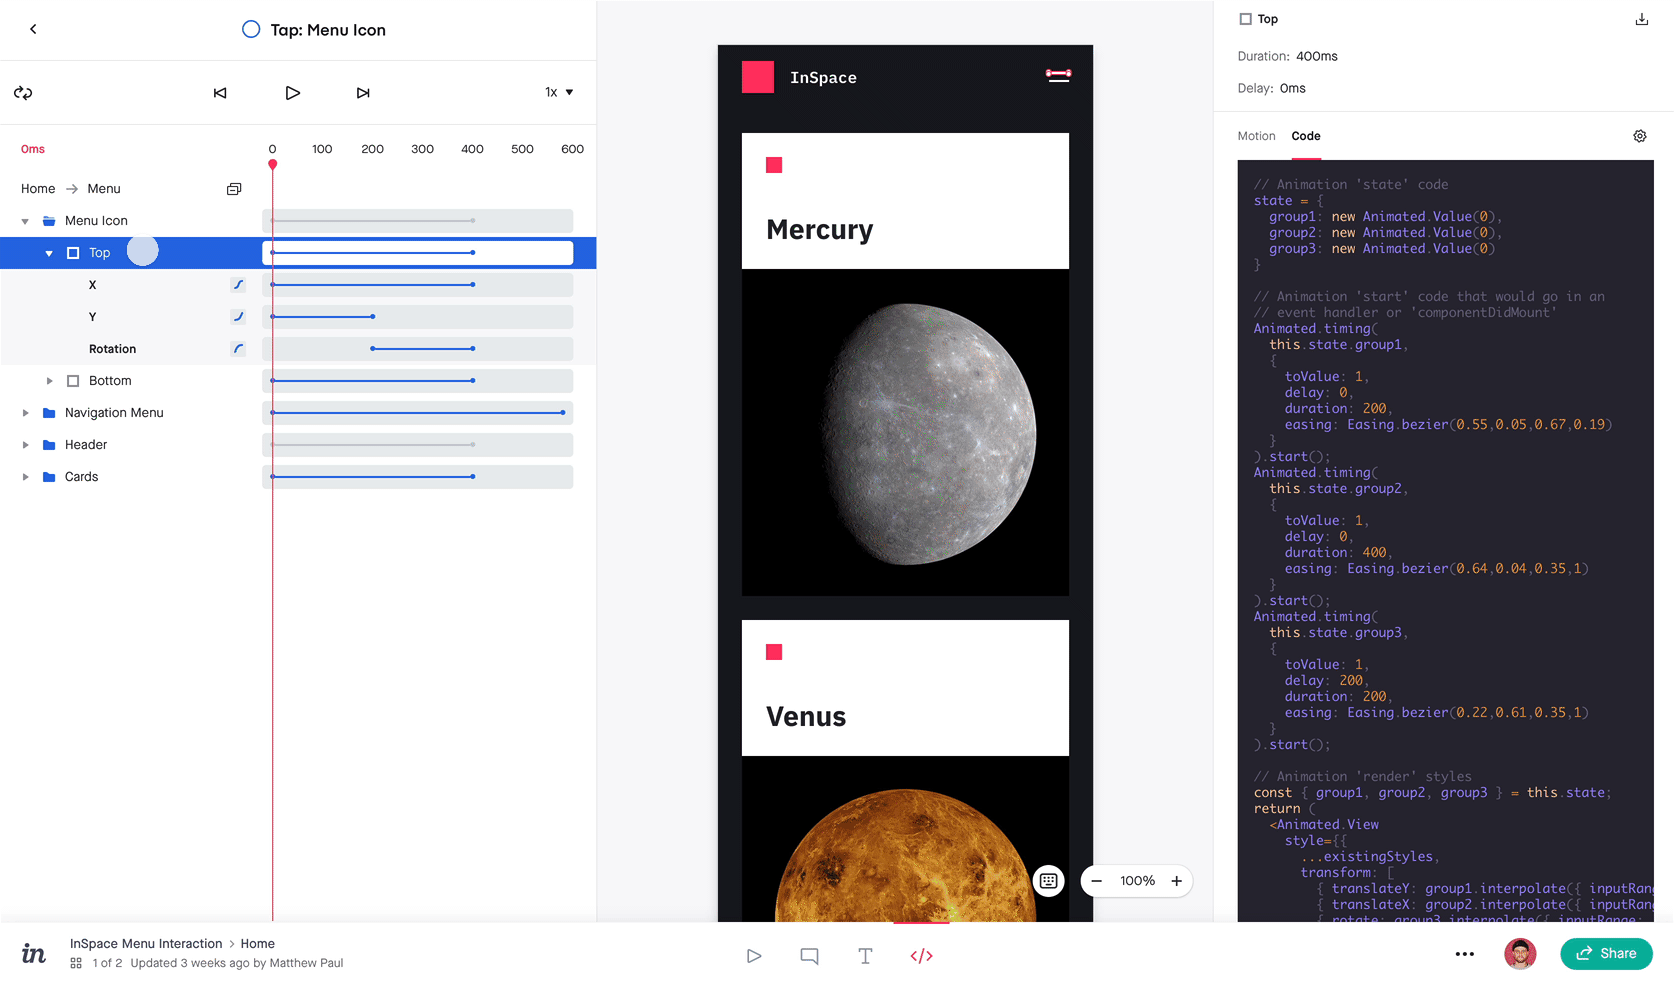 Inspect Motion code view